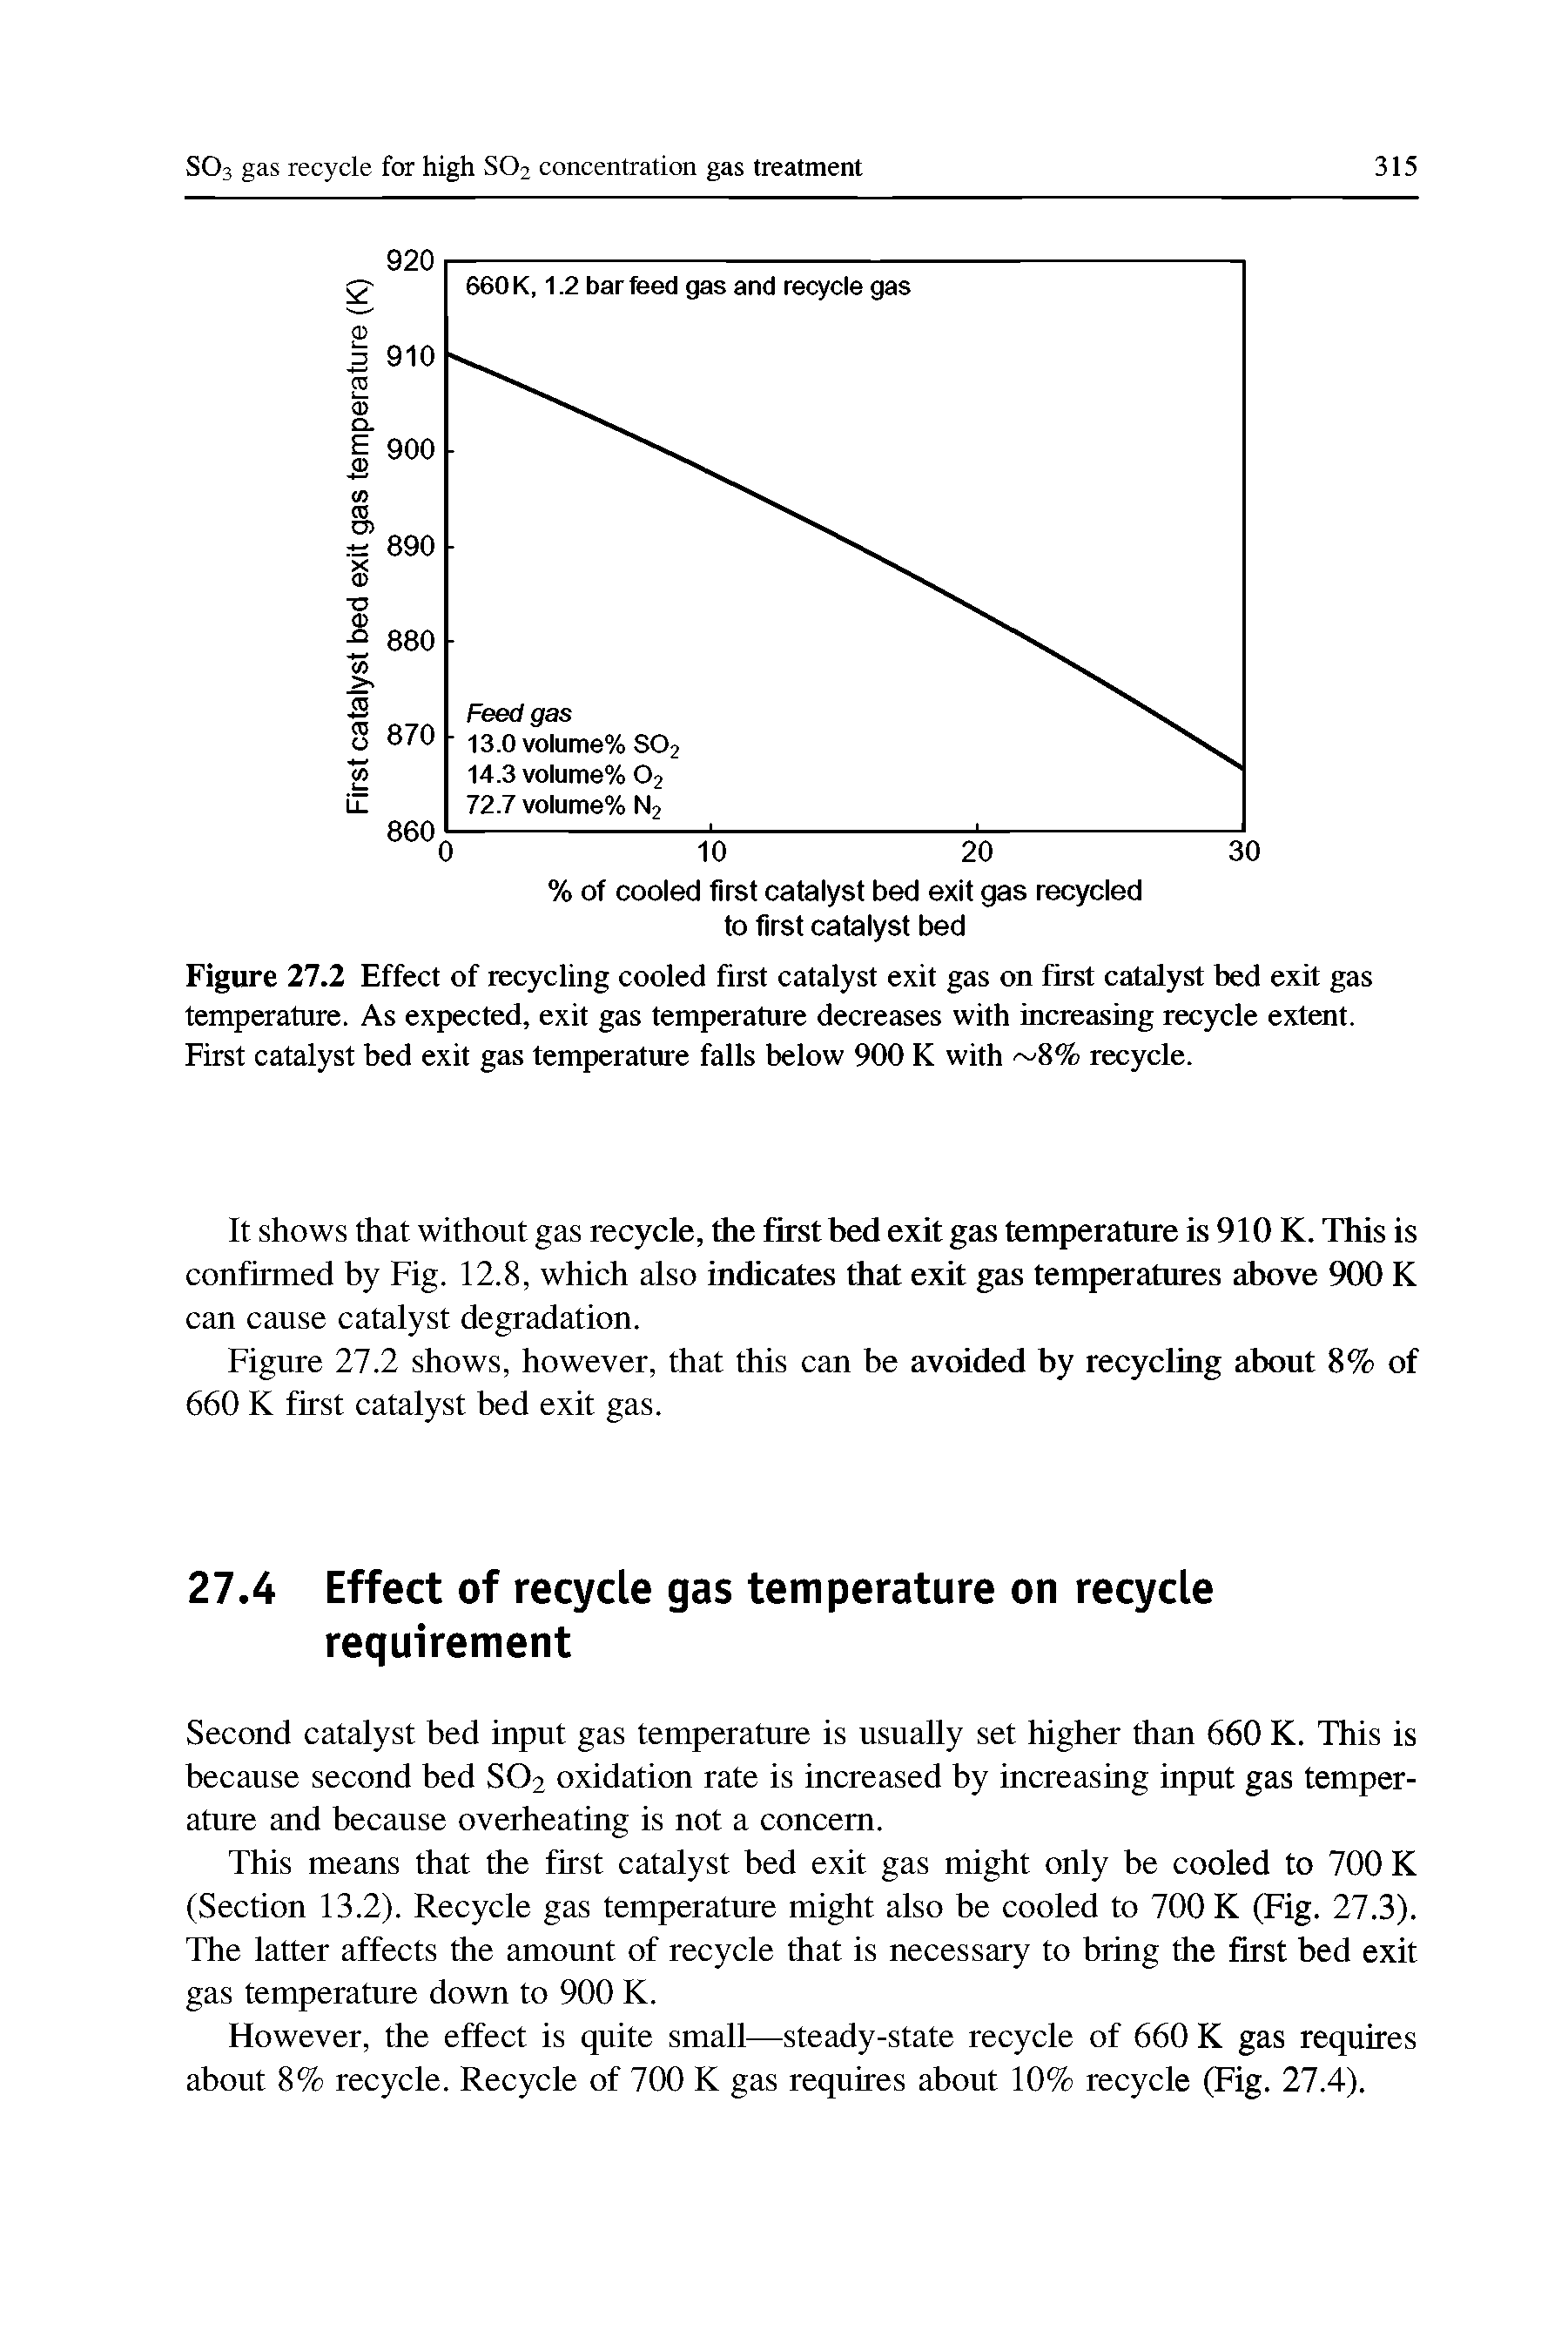 Figure 27.2 Effect of recycling cooled first catalyst exit gas on first catalyst bed exit gas temperature. As expected, exit gas temperature decreases with increasing recycle extent. First catalyst bed exit gas temperature falls below 900 K with 8% recycle.